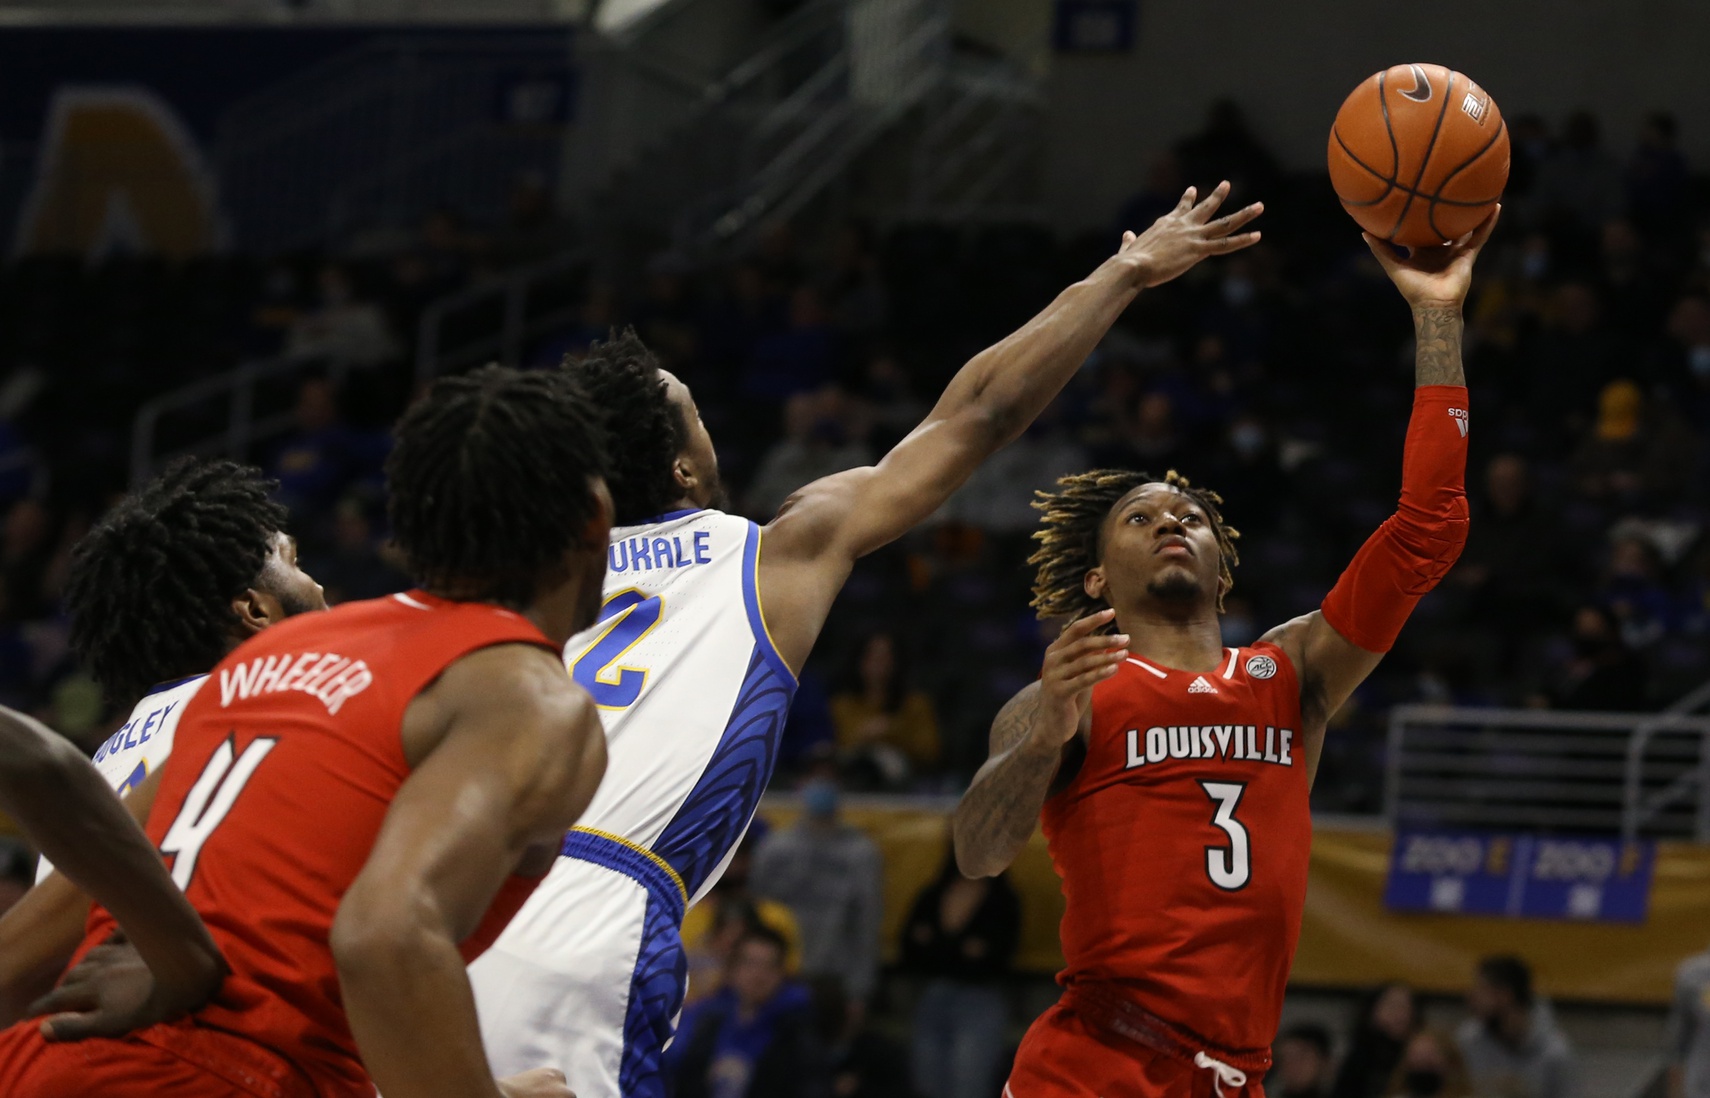 How to Watch Louisville Cardinals vs. Pitt Panthers: Live Stream, TV Channel, Start Time